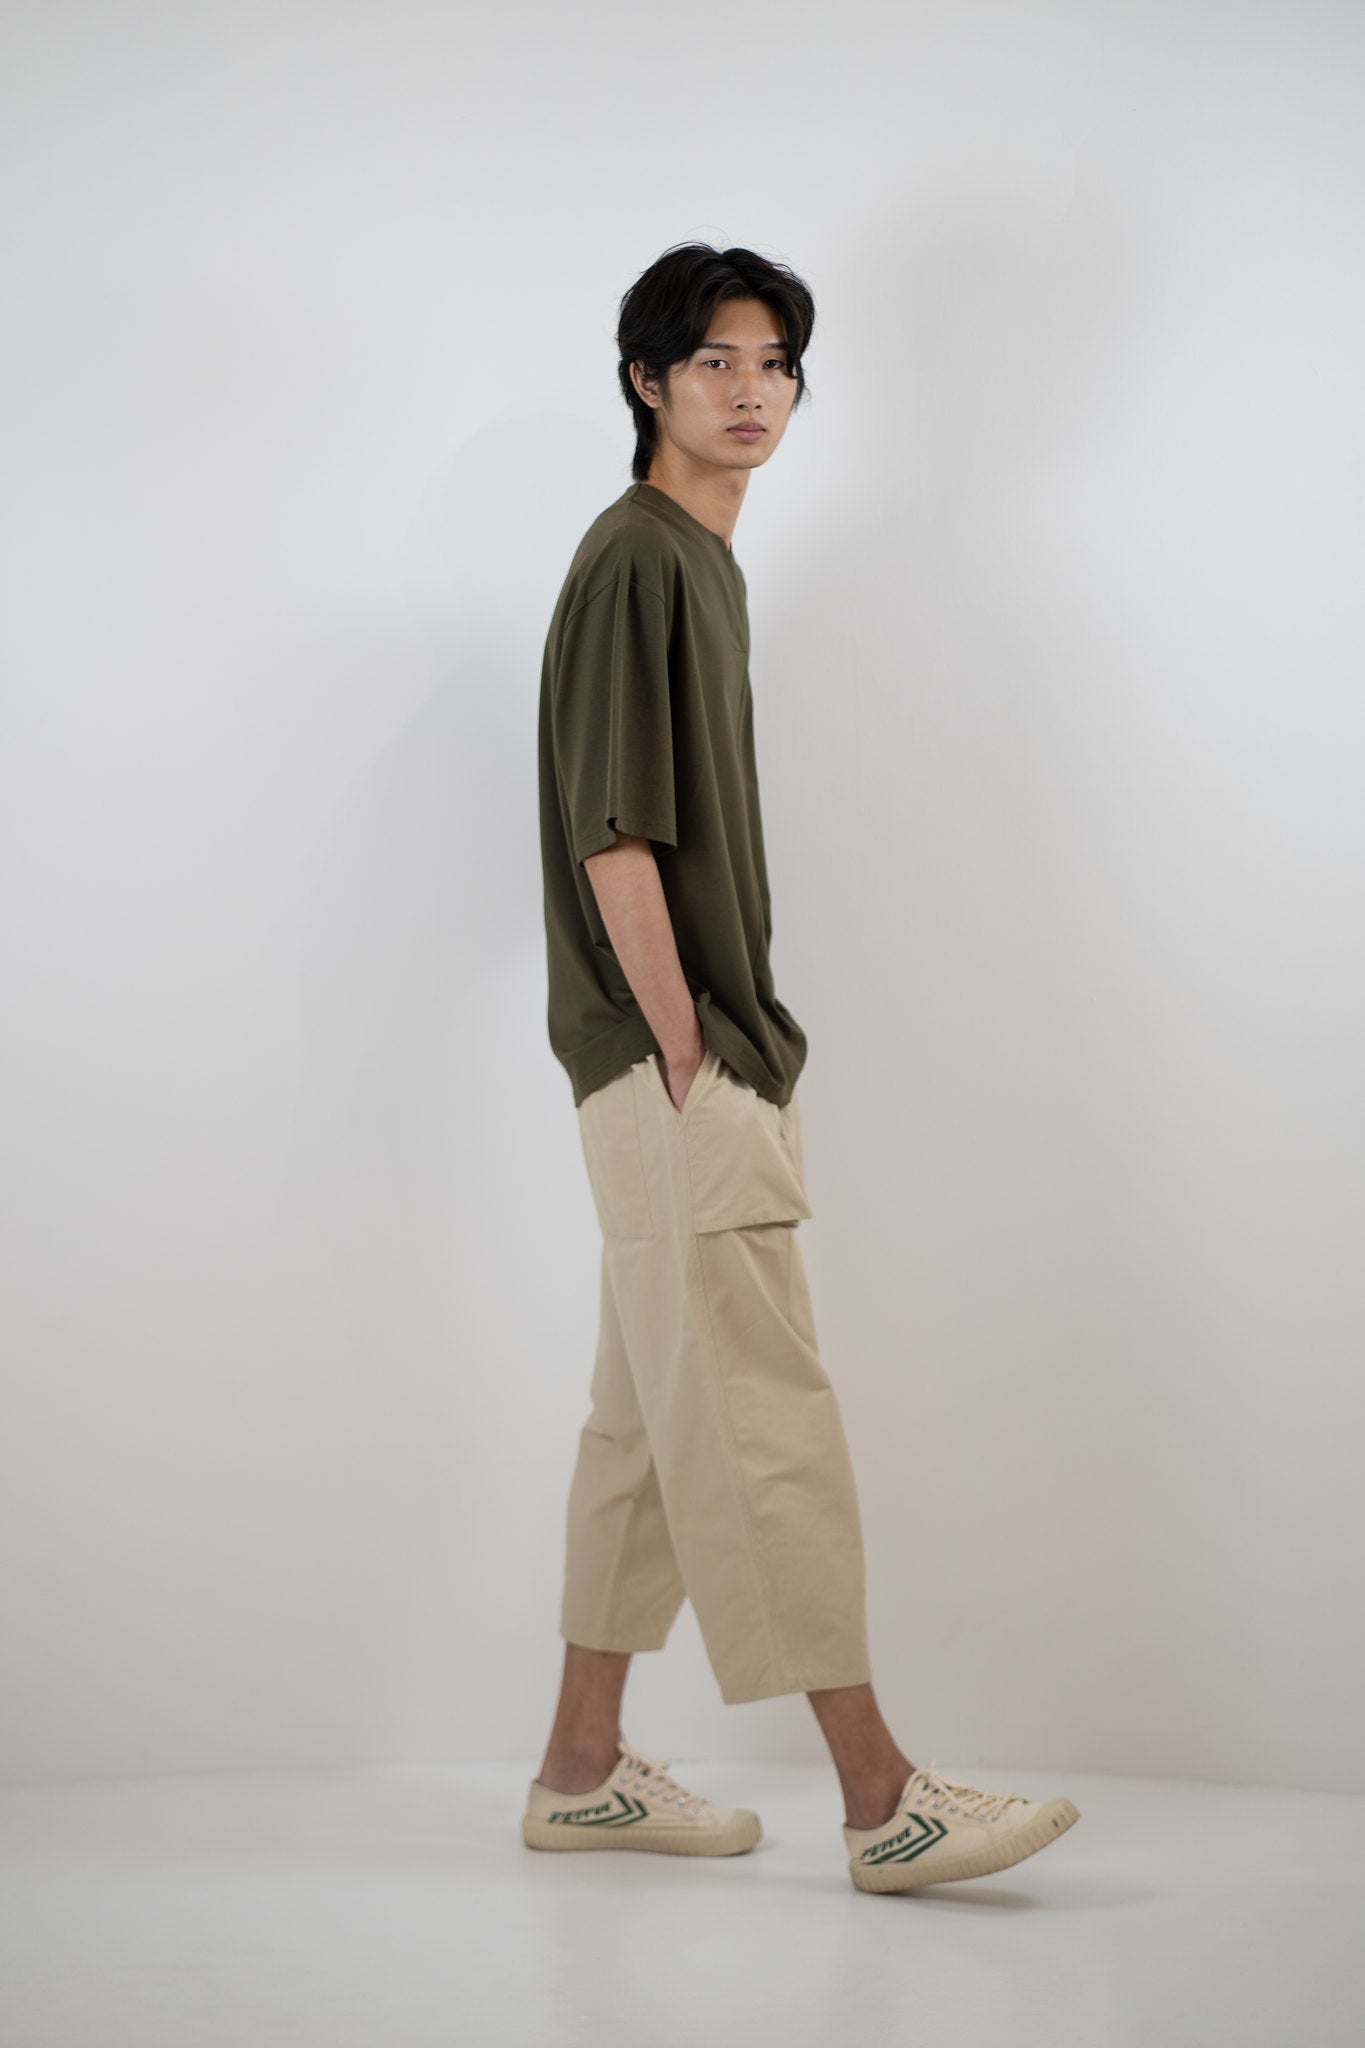 V-Placket Tee - Olive Green - G R A Y E